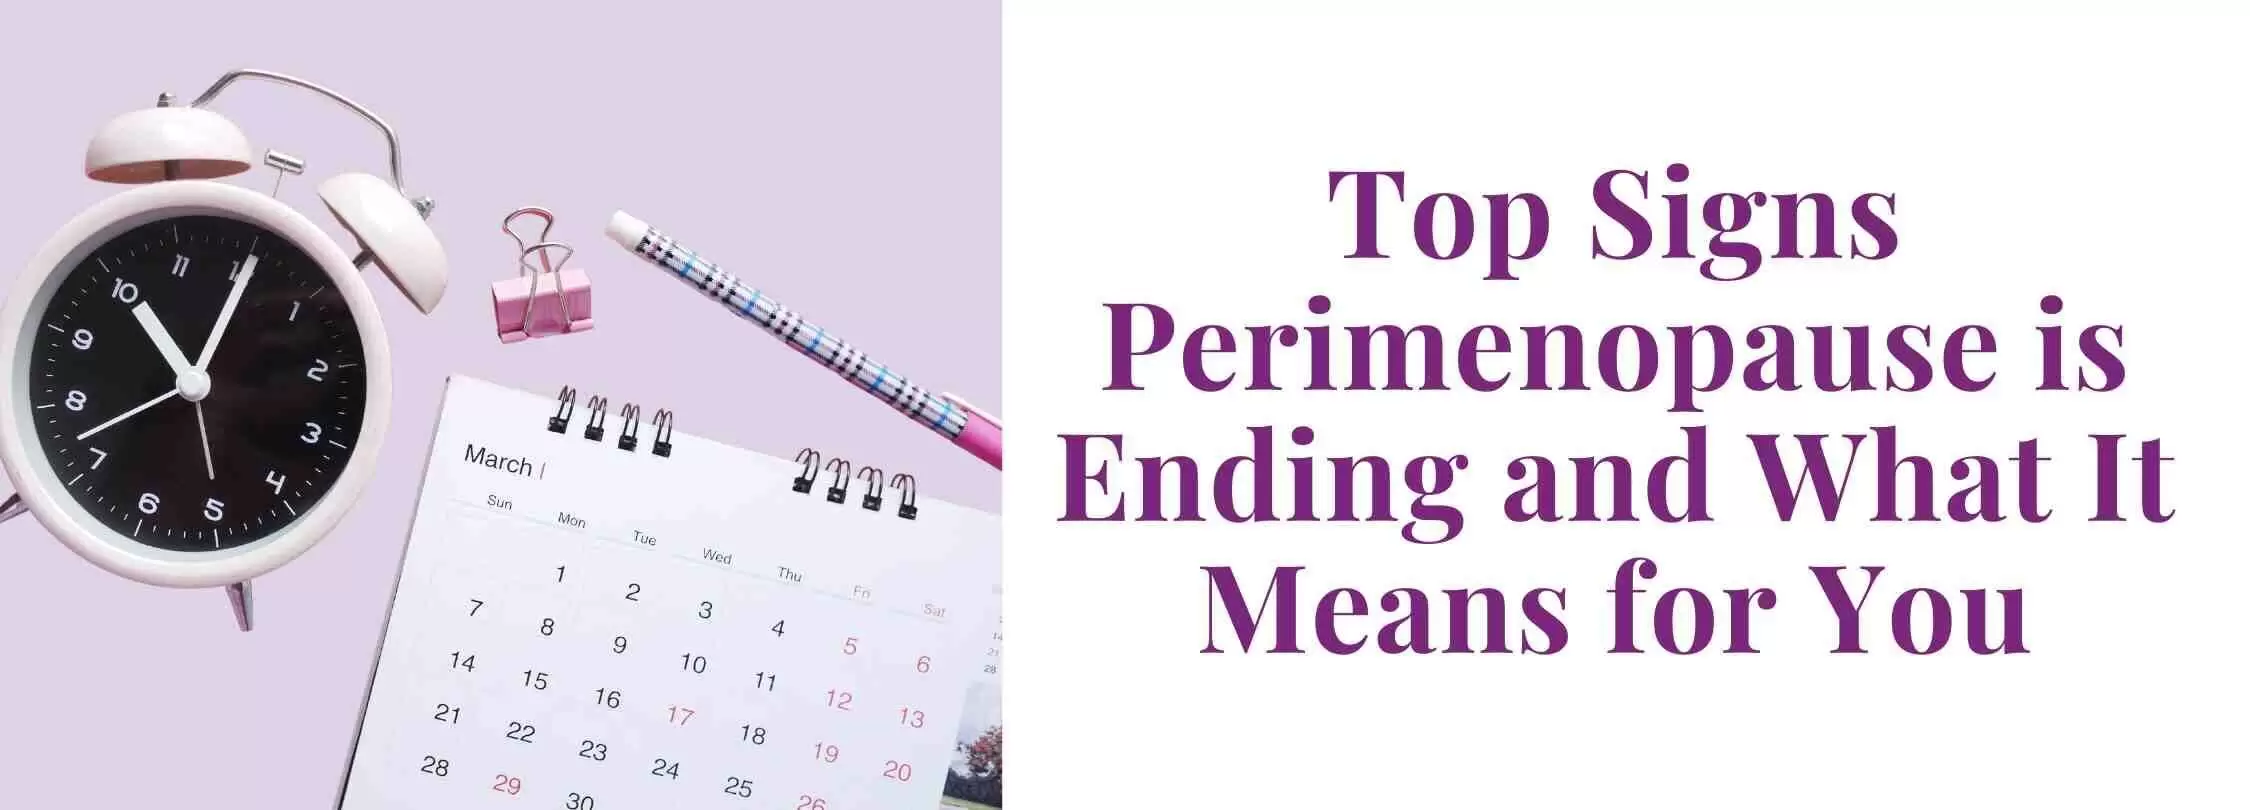 Top signs perimenopause is ending and wat it means for you